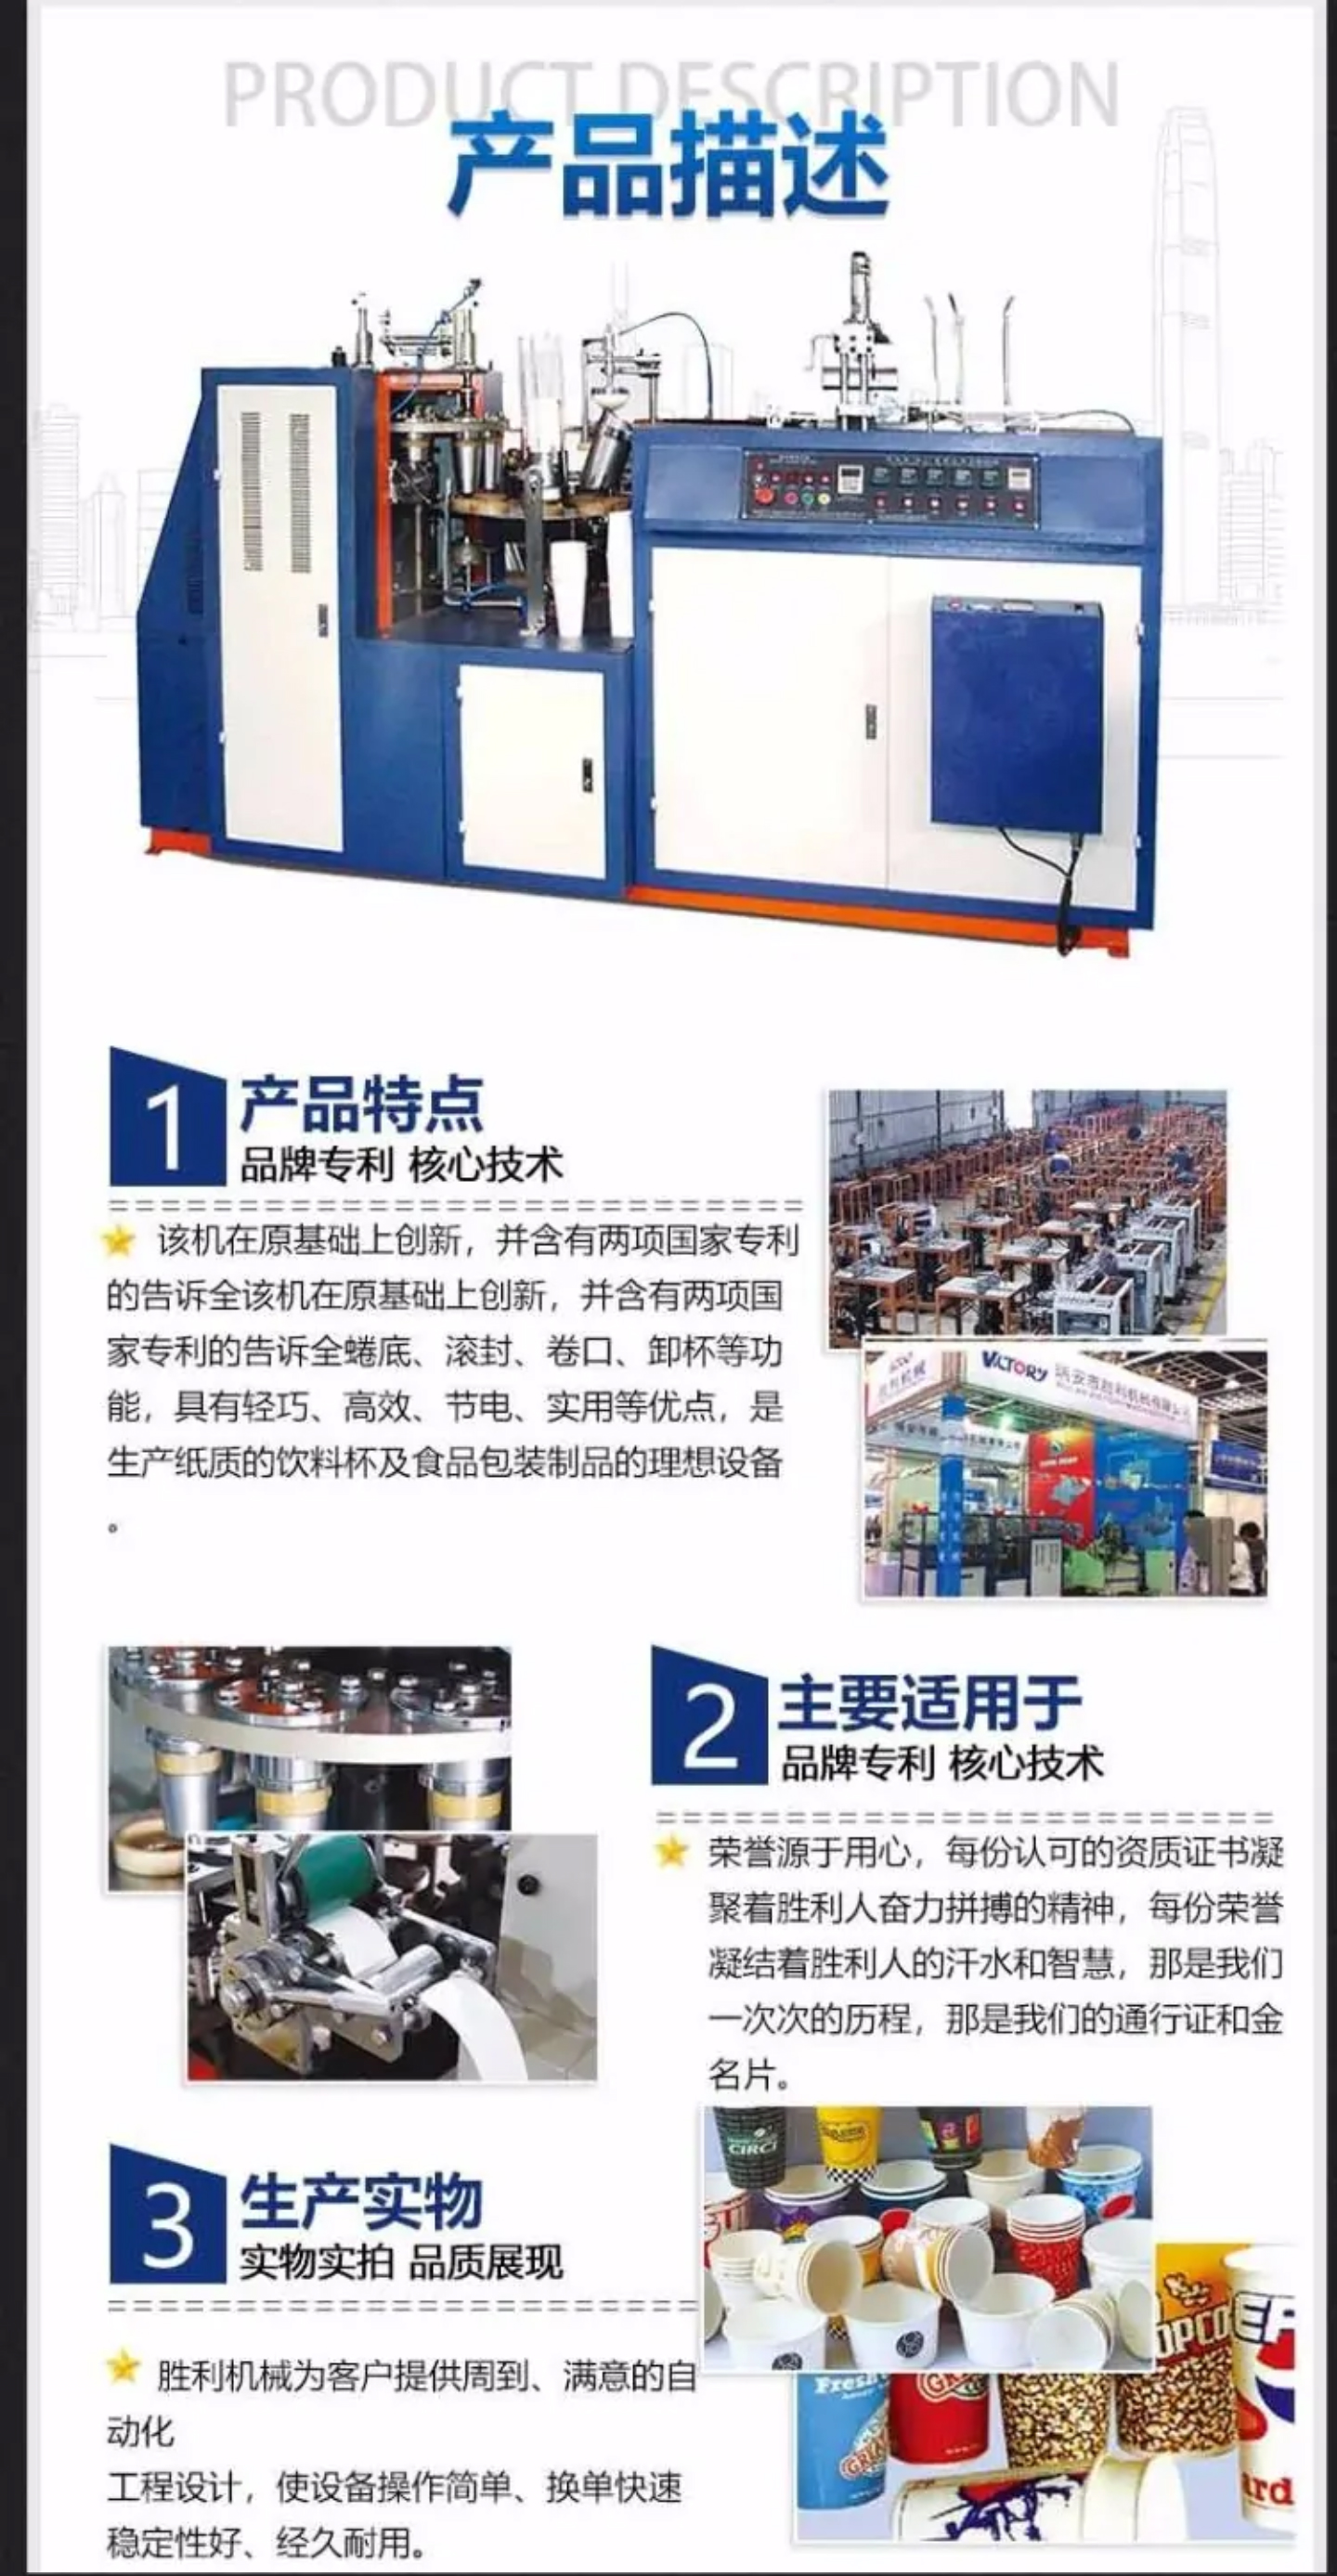 Fully automatic disposable paper bowl machine, takeout packaging, lunch box forming machine, aluminum foil coating paper bowl machine